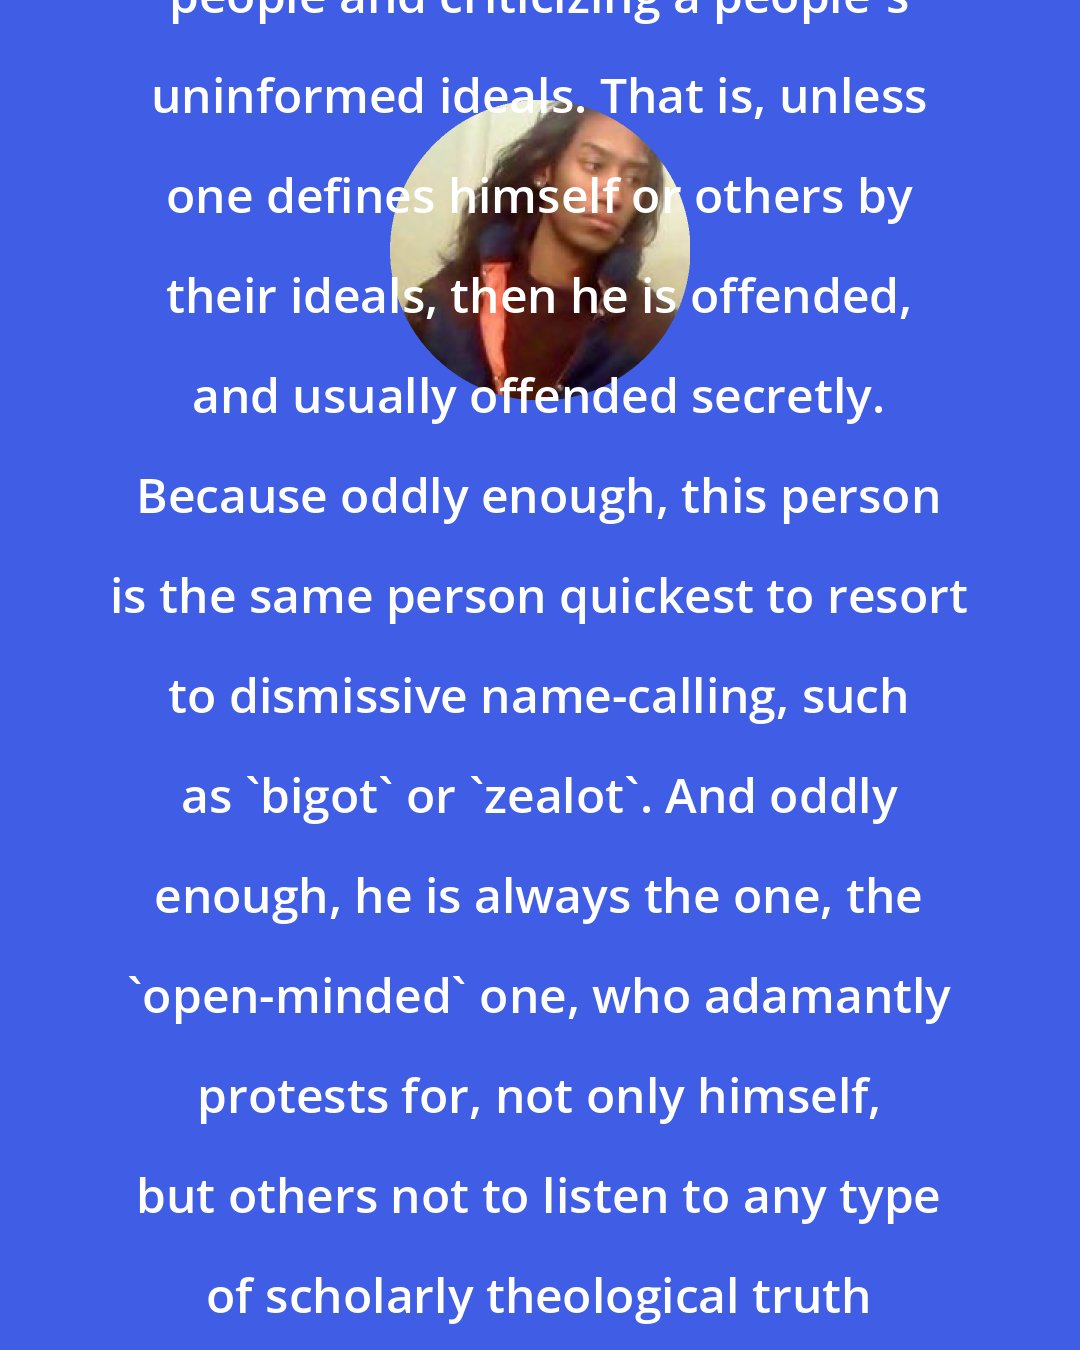 Criss Jami: There is a difference between criticizing people and criticizing a people's uninformed ideals. That is, unless one defines himself or others by their ideals, then he is offended, and usually offended secretly. Because oddly enough, this person is the same person quickest to resort to dismissive name-calling, such as 'bigot' or 'zealot'. And oddly enough, he is always the one, the 'open-minded' one, who adamantly protests for, not only himself, but others not to listen to any type of scholarly theological truth inherently for the sake of his own personal, moral beliefs.